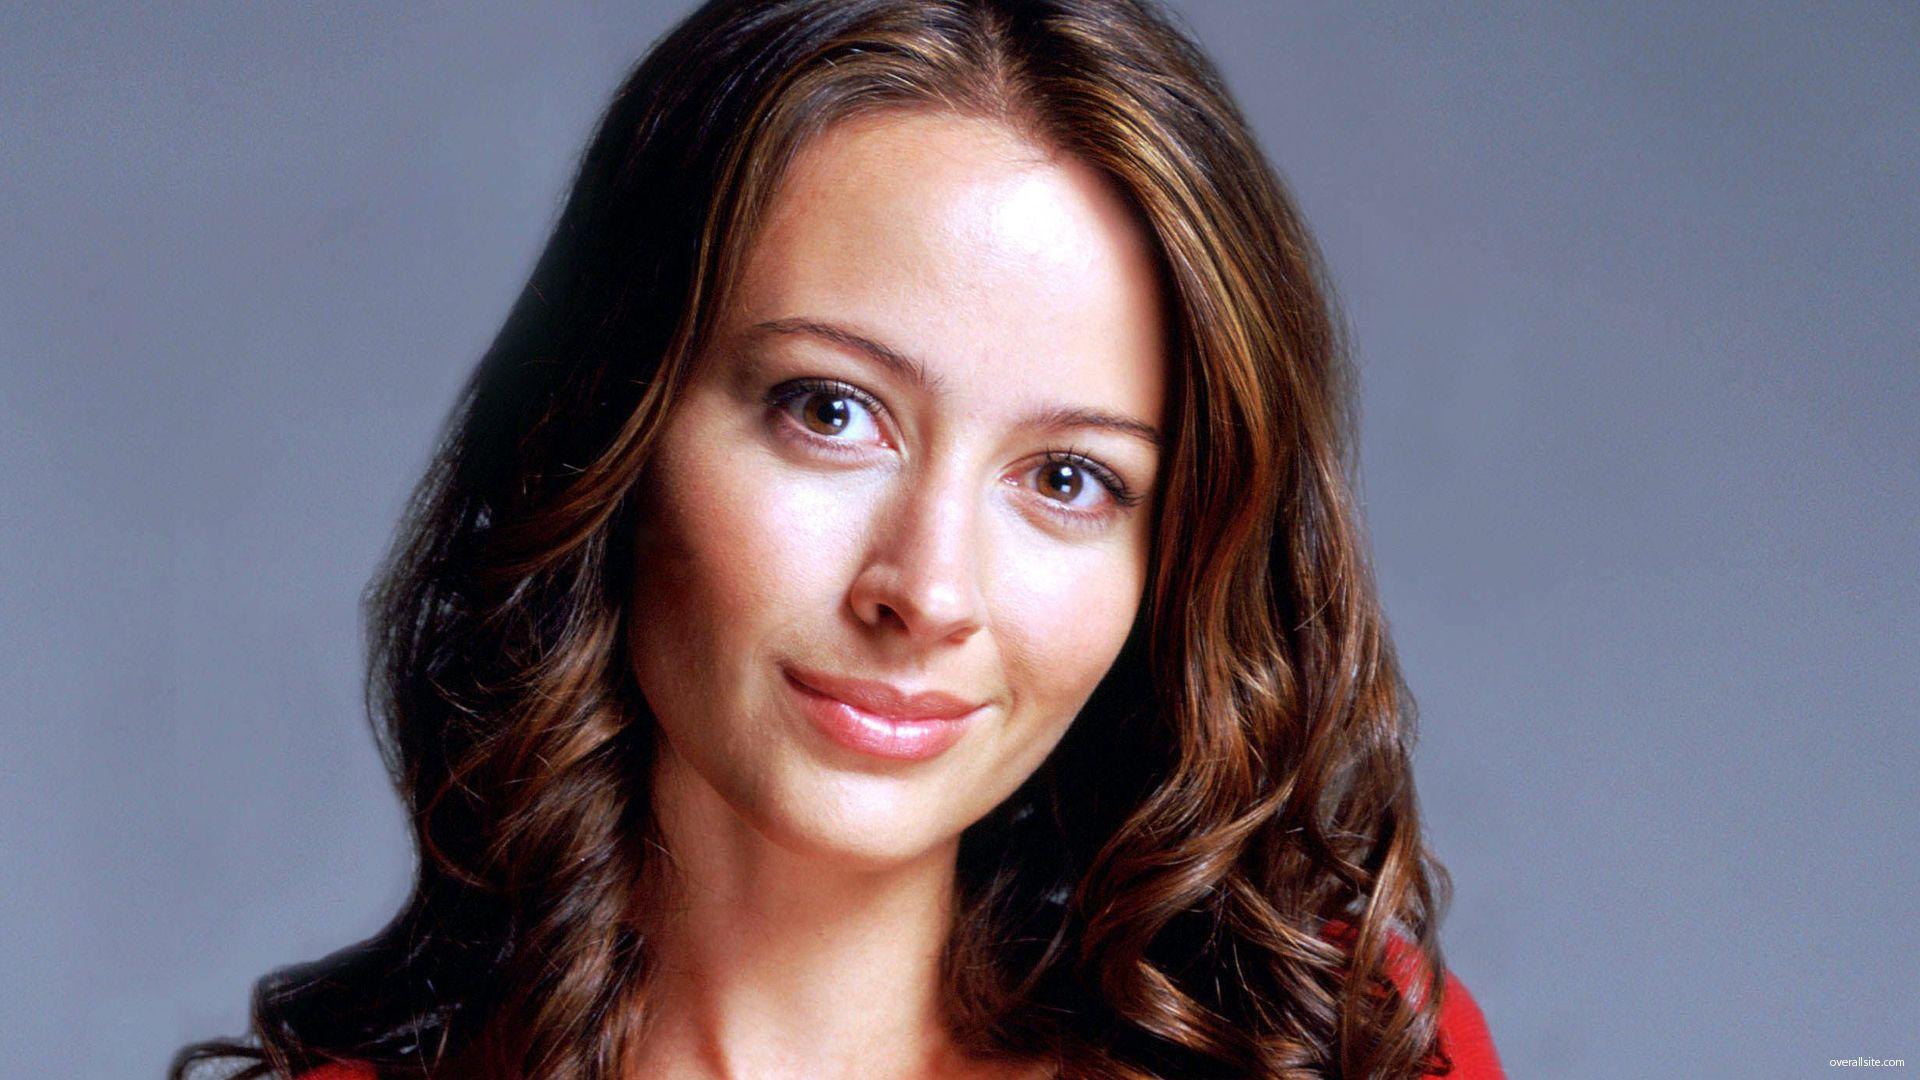 Amy Acker Wall 6 wallpapers  Amy Acker Wall 6 stock photos